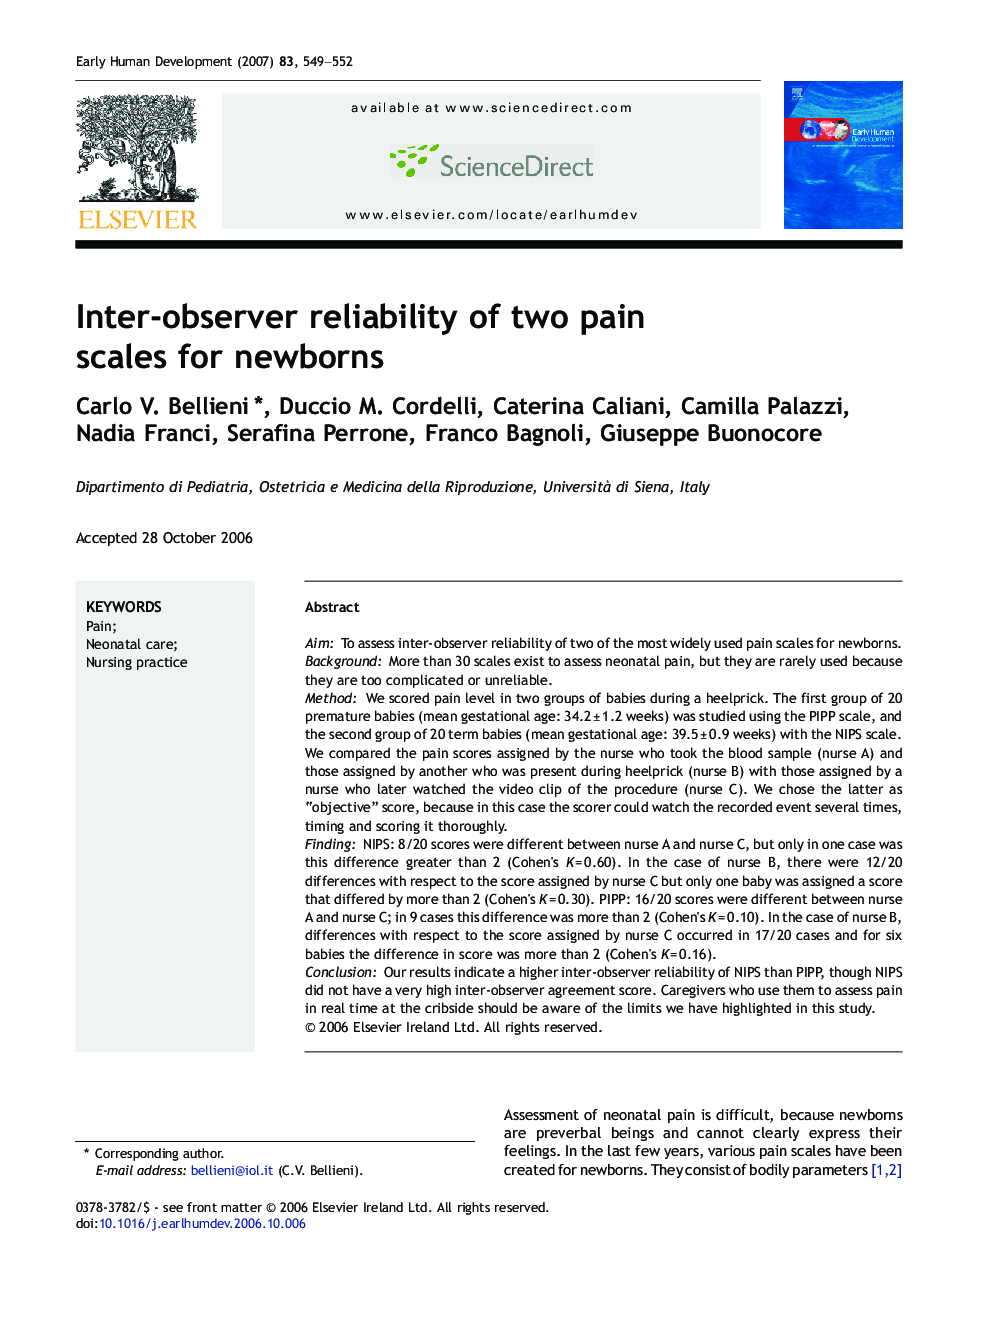 Inter-observer reliability of two pain scales for newborns